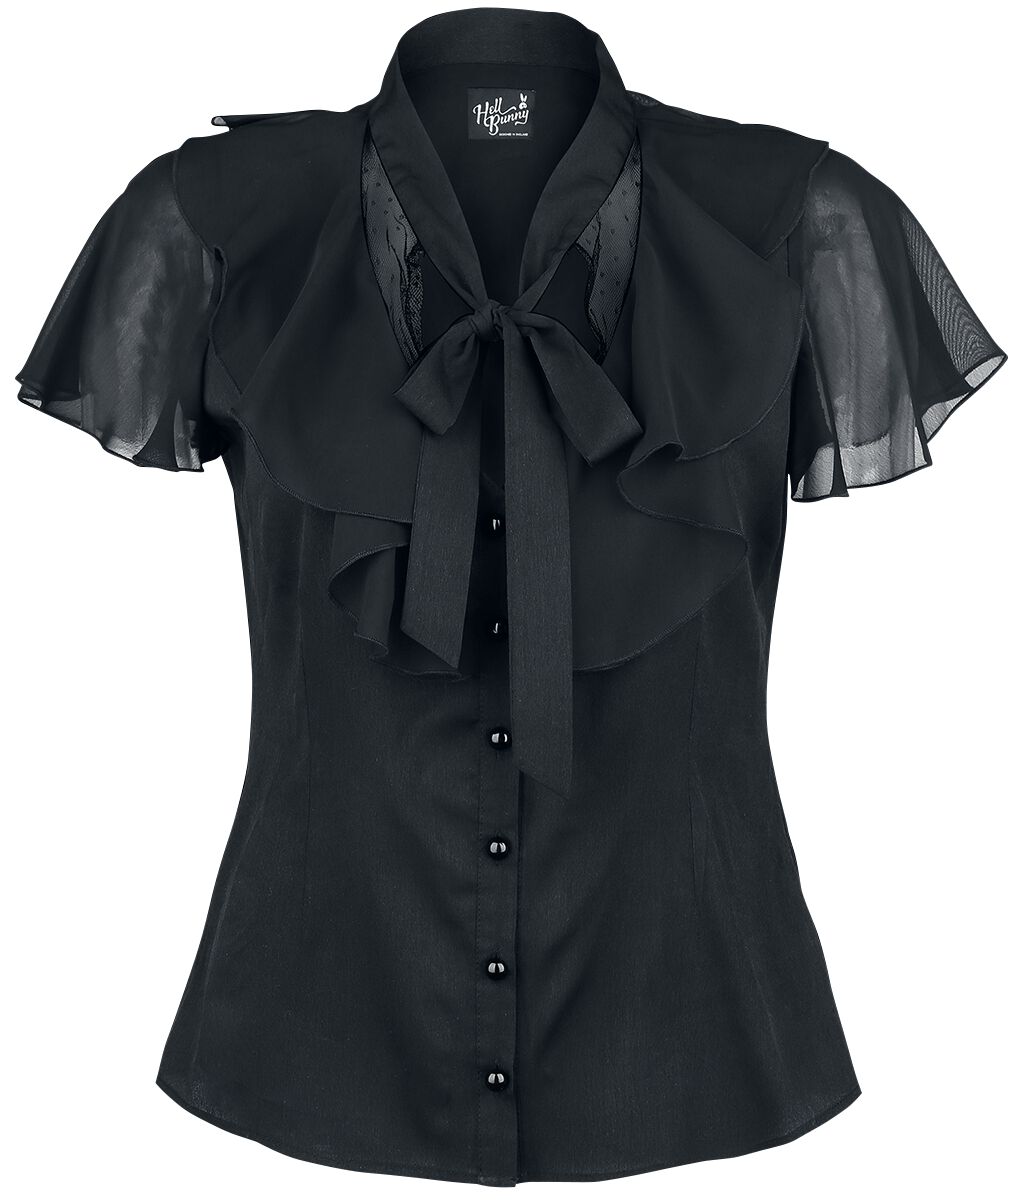 Image of Blusa Rockabilly di Hell Bunny - Evanora Blouse - XS a 4XL - Donna - nero